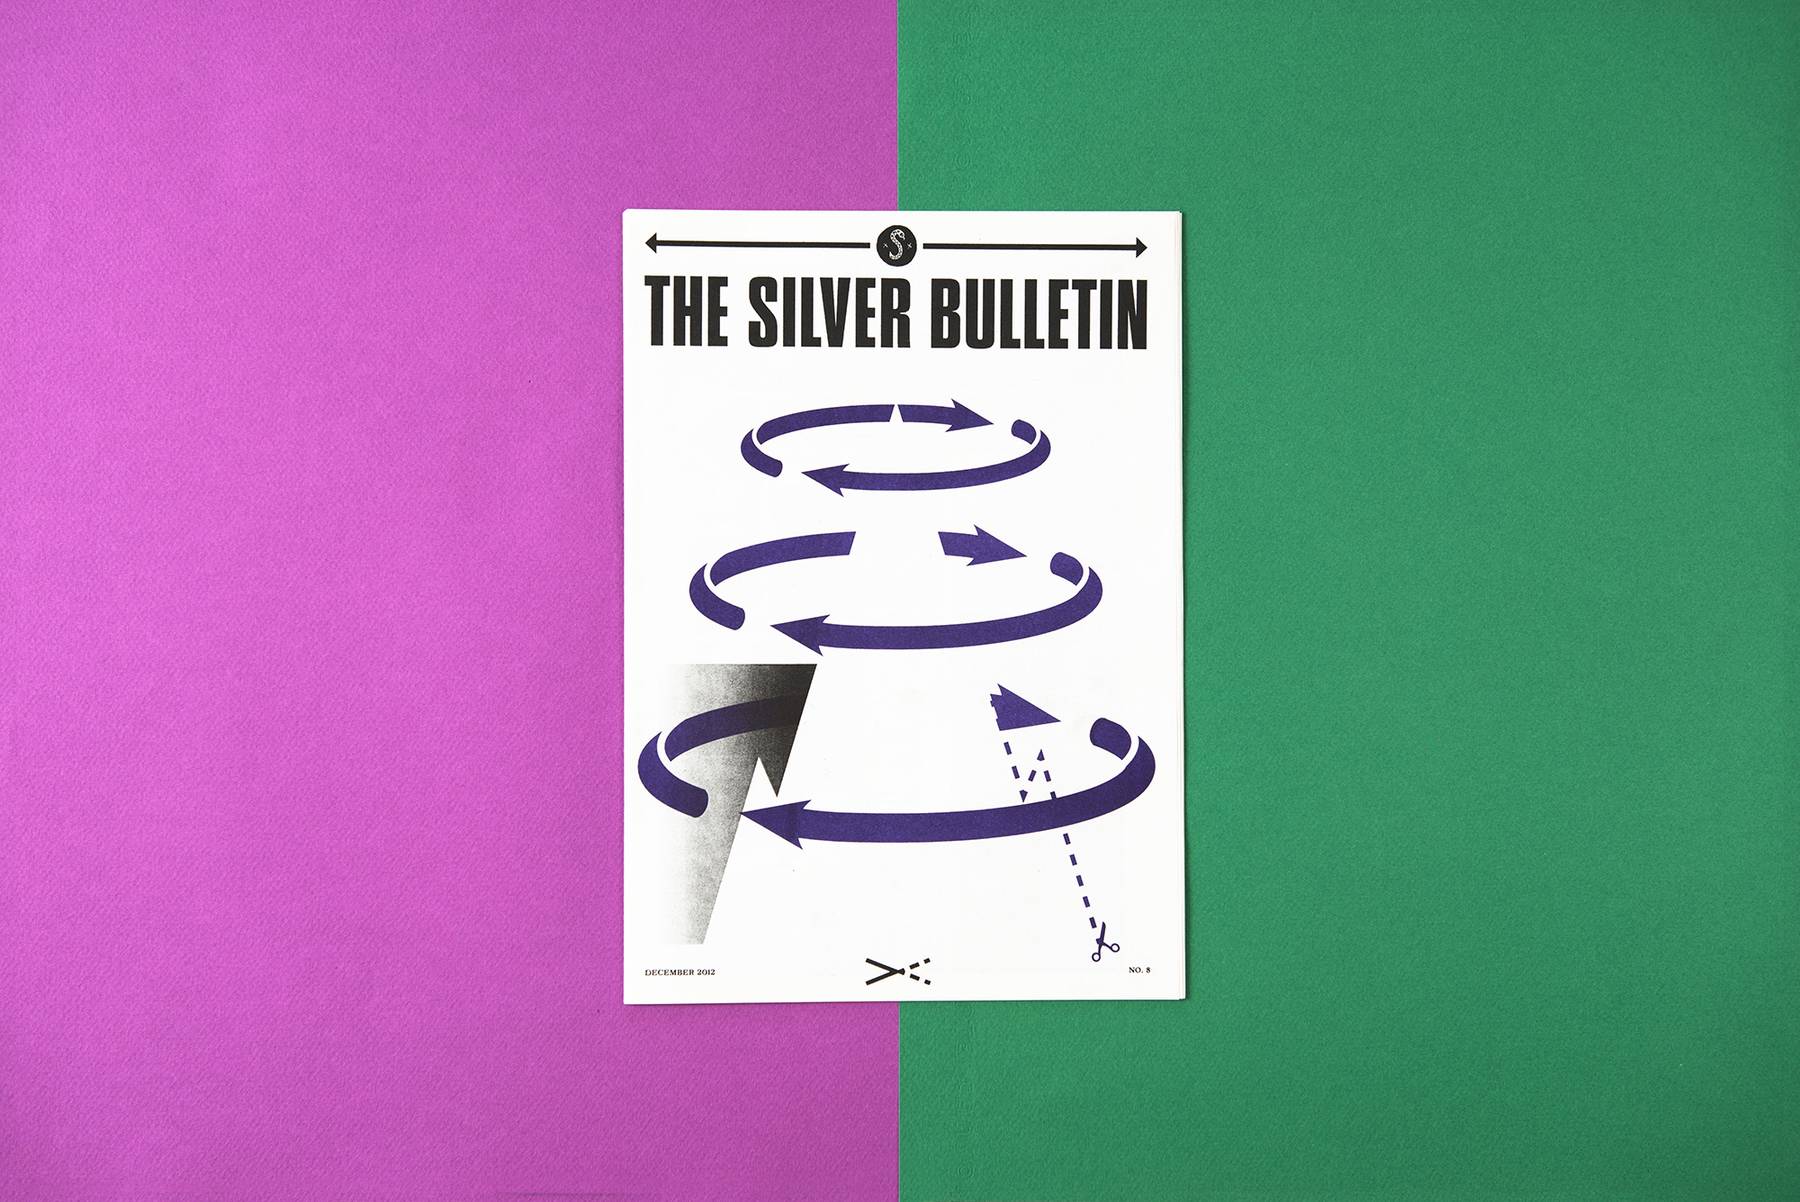 The Silver Bulletin 2012 image